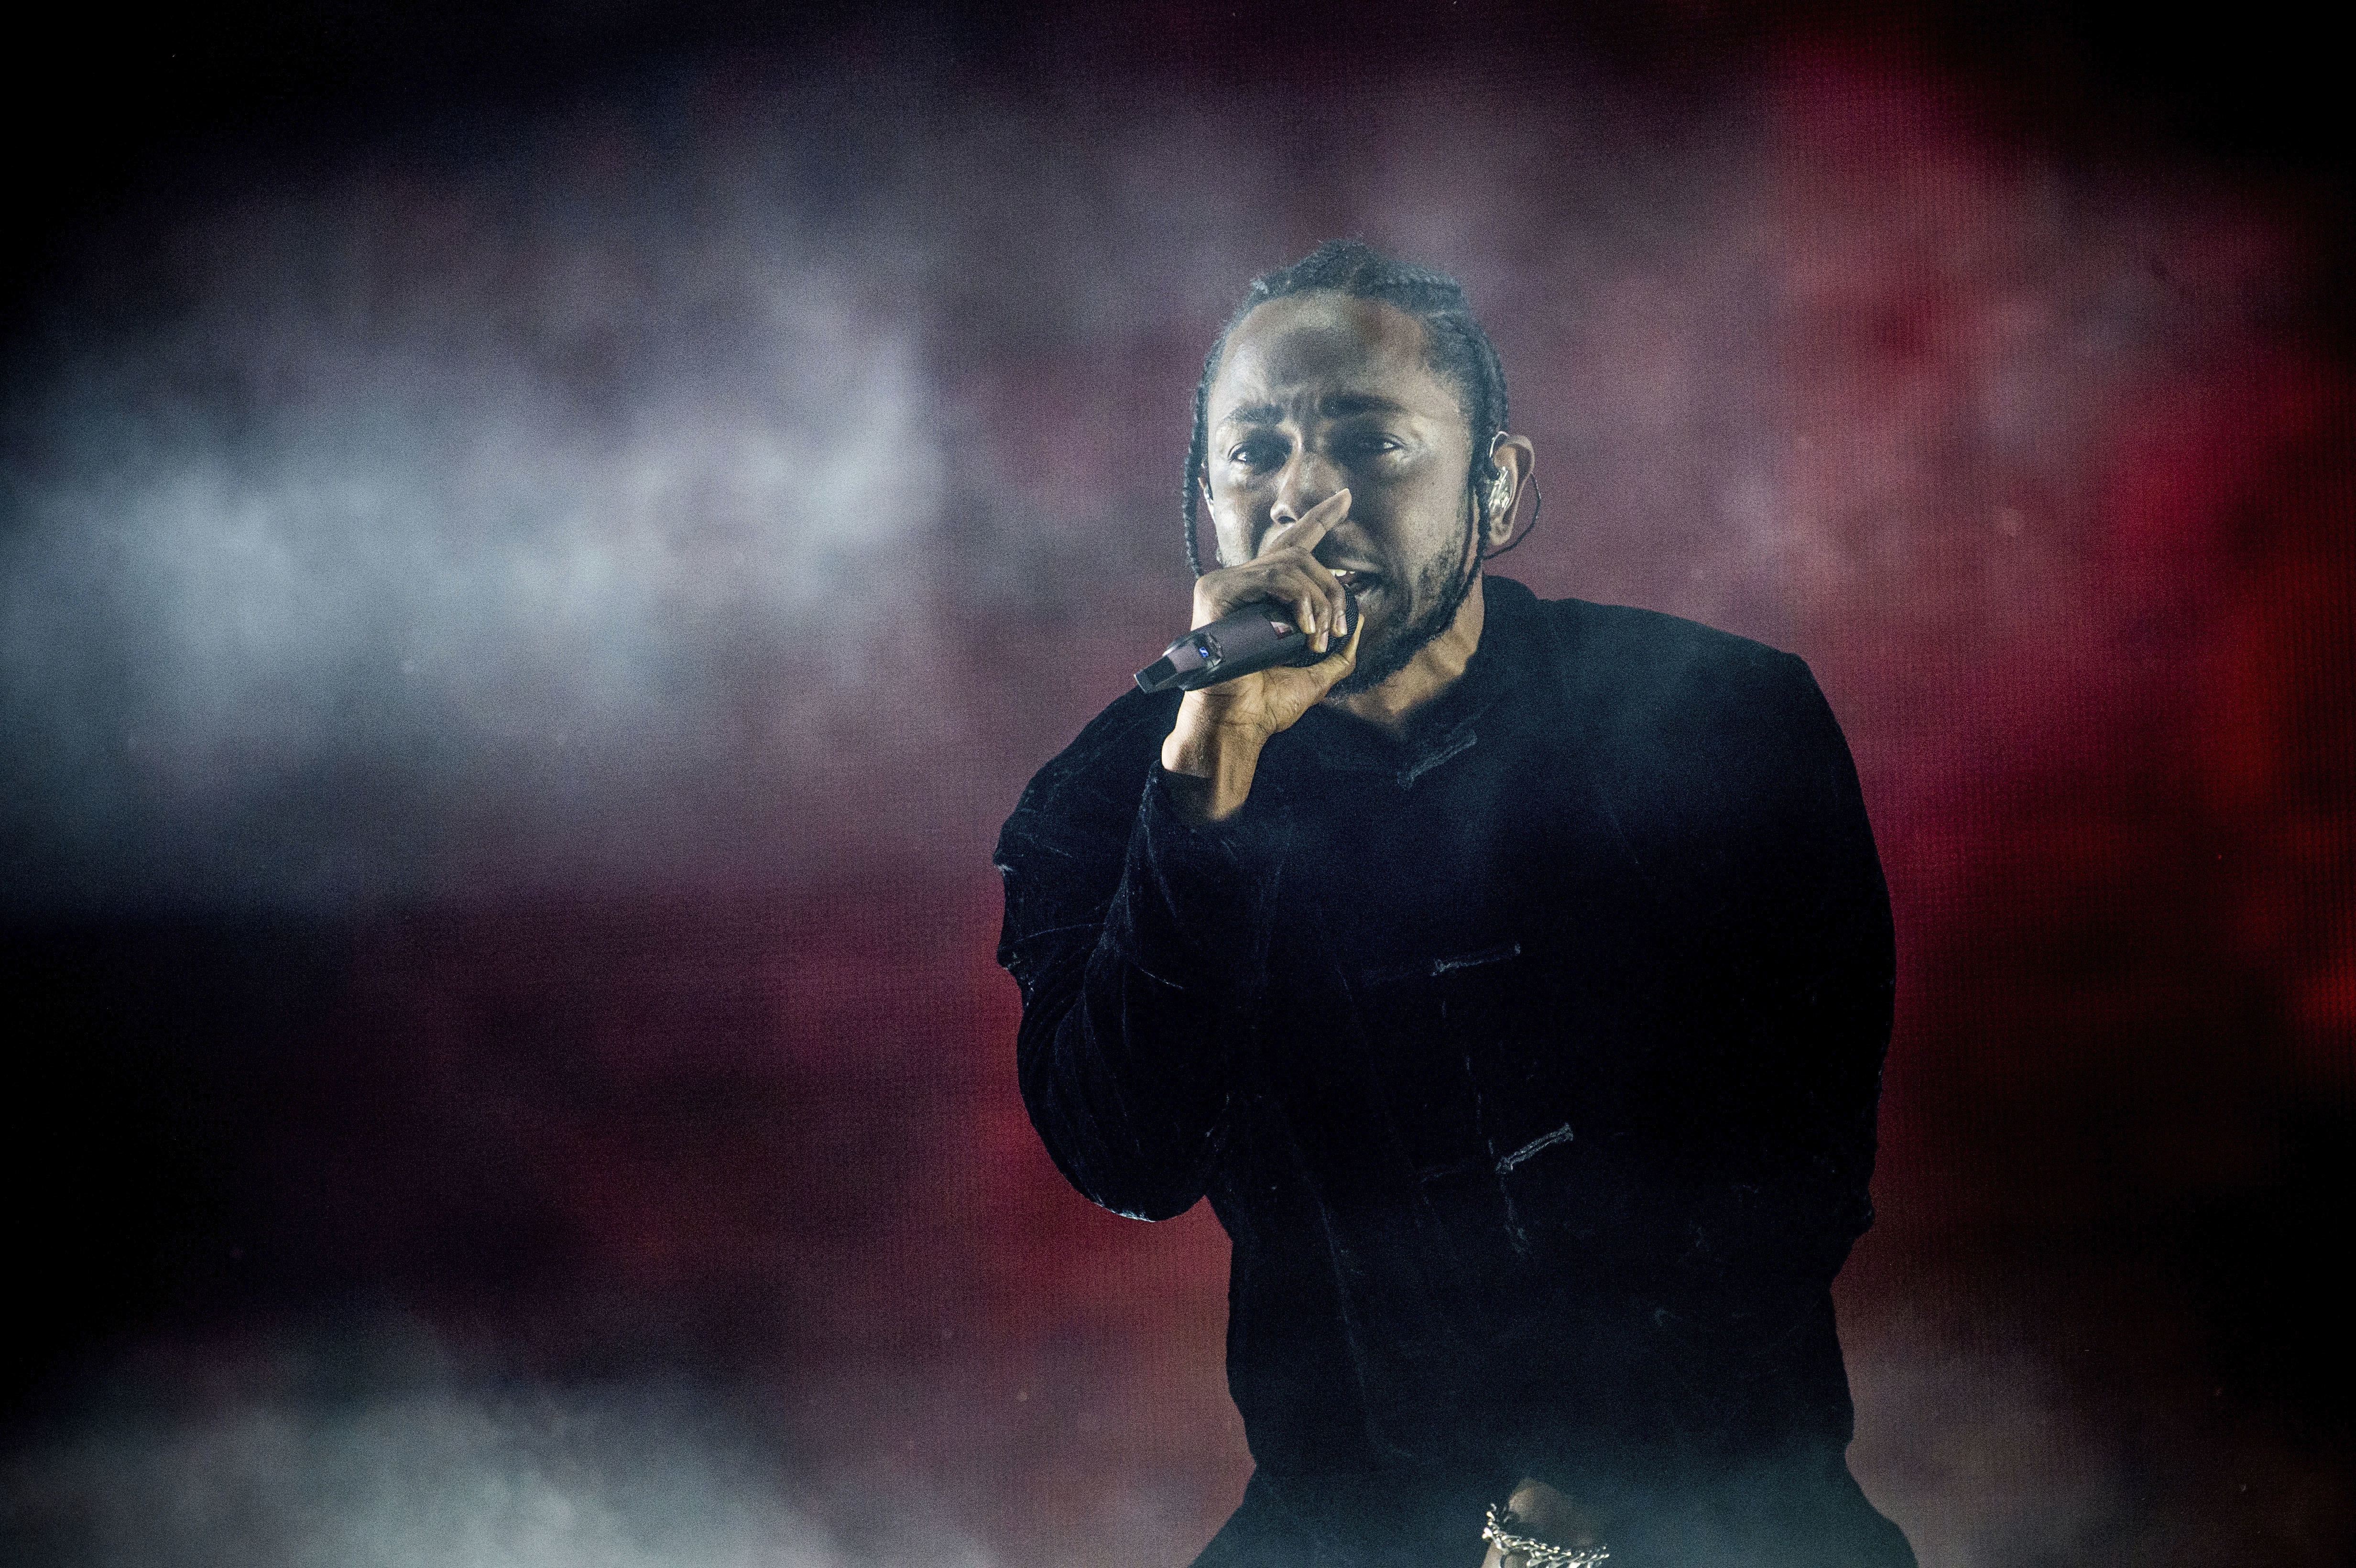 FILE - Kendrick Lamar performs at Coachella Music & Arts Festival at the Empire Polo Club on Sunday, April 16, 2017, in Indio, Calif. Kendrick Lamar turned his Juneteenth “Pop Out” concert into a celebration of Los Angeles unity. The 37-year-old rapper curated a three-hour livestreamed concert featuring a mix of up-and-coming LA rappers and stars including Dr. Dre and Tyler, The Creator. (Photo by Amy Harris/Invision/AP, File)